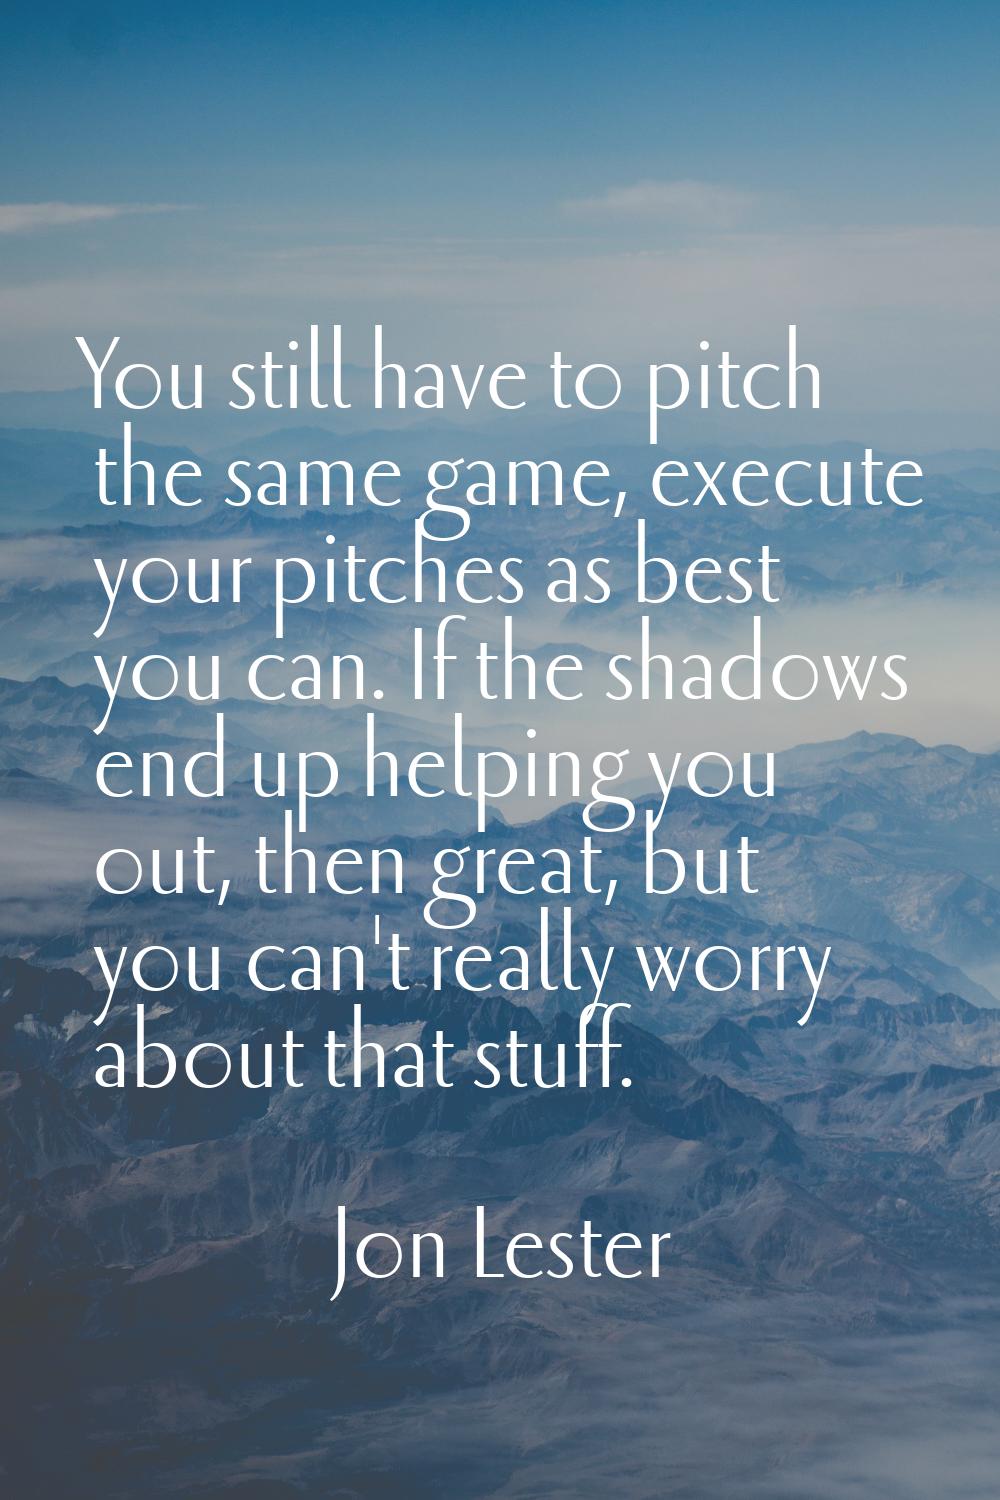 You still have to pitch the same game, execute your pitches as best you can. If the shadows end up 